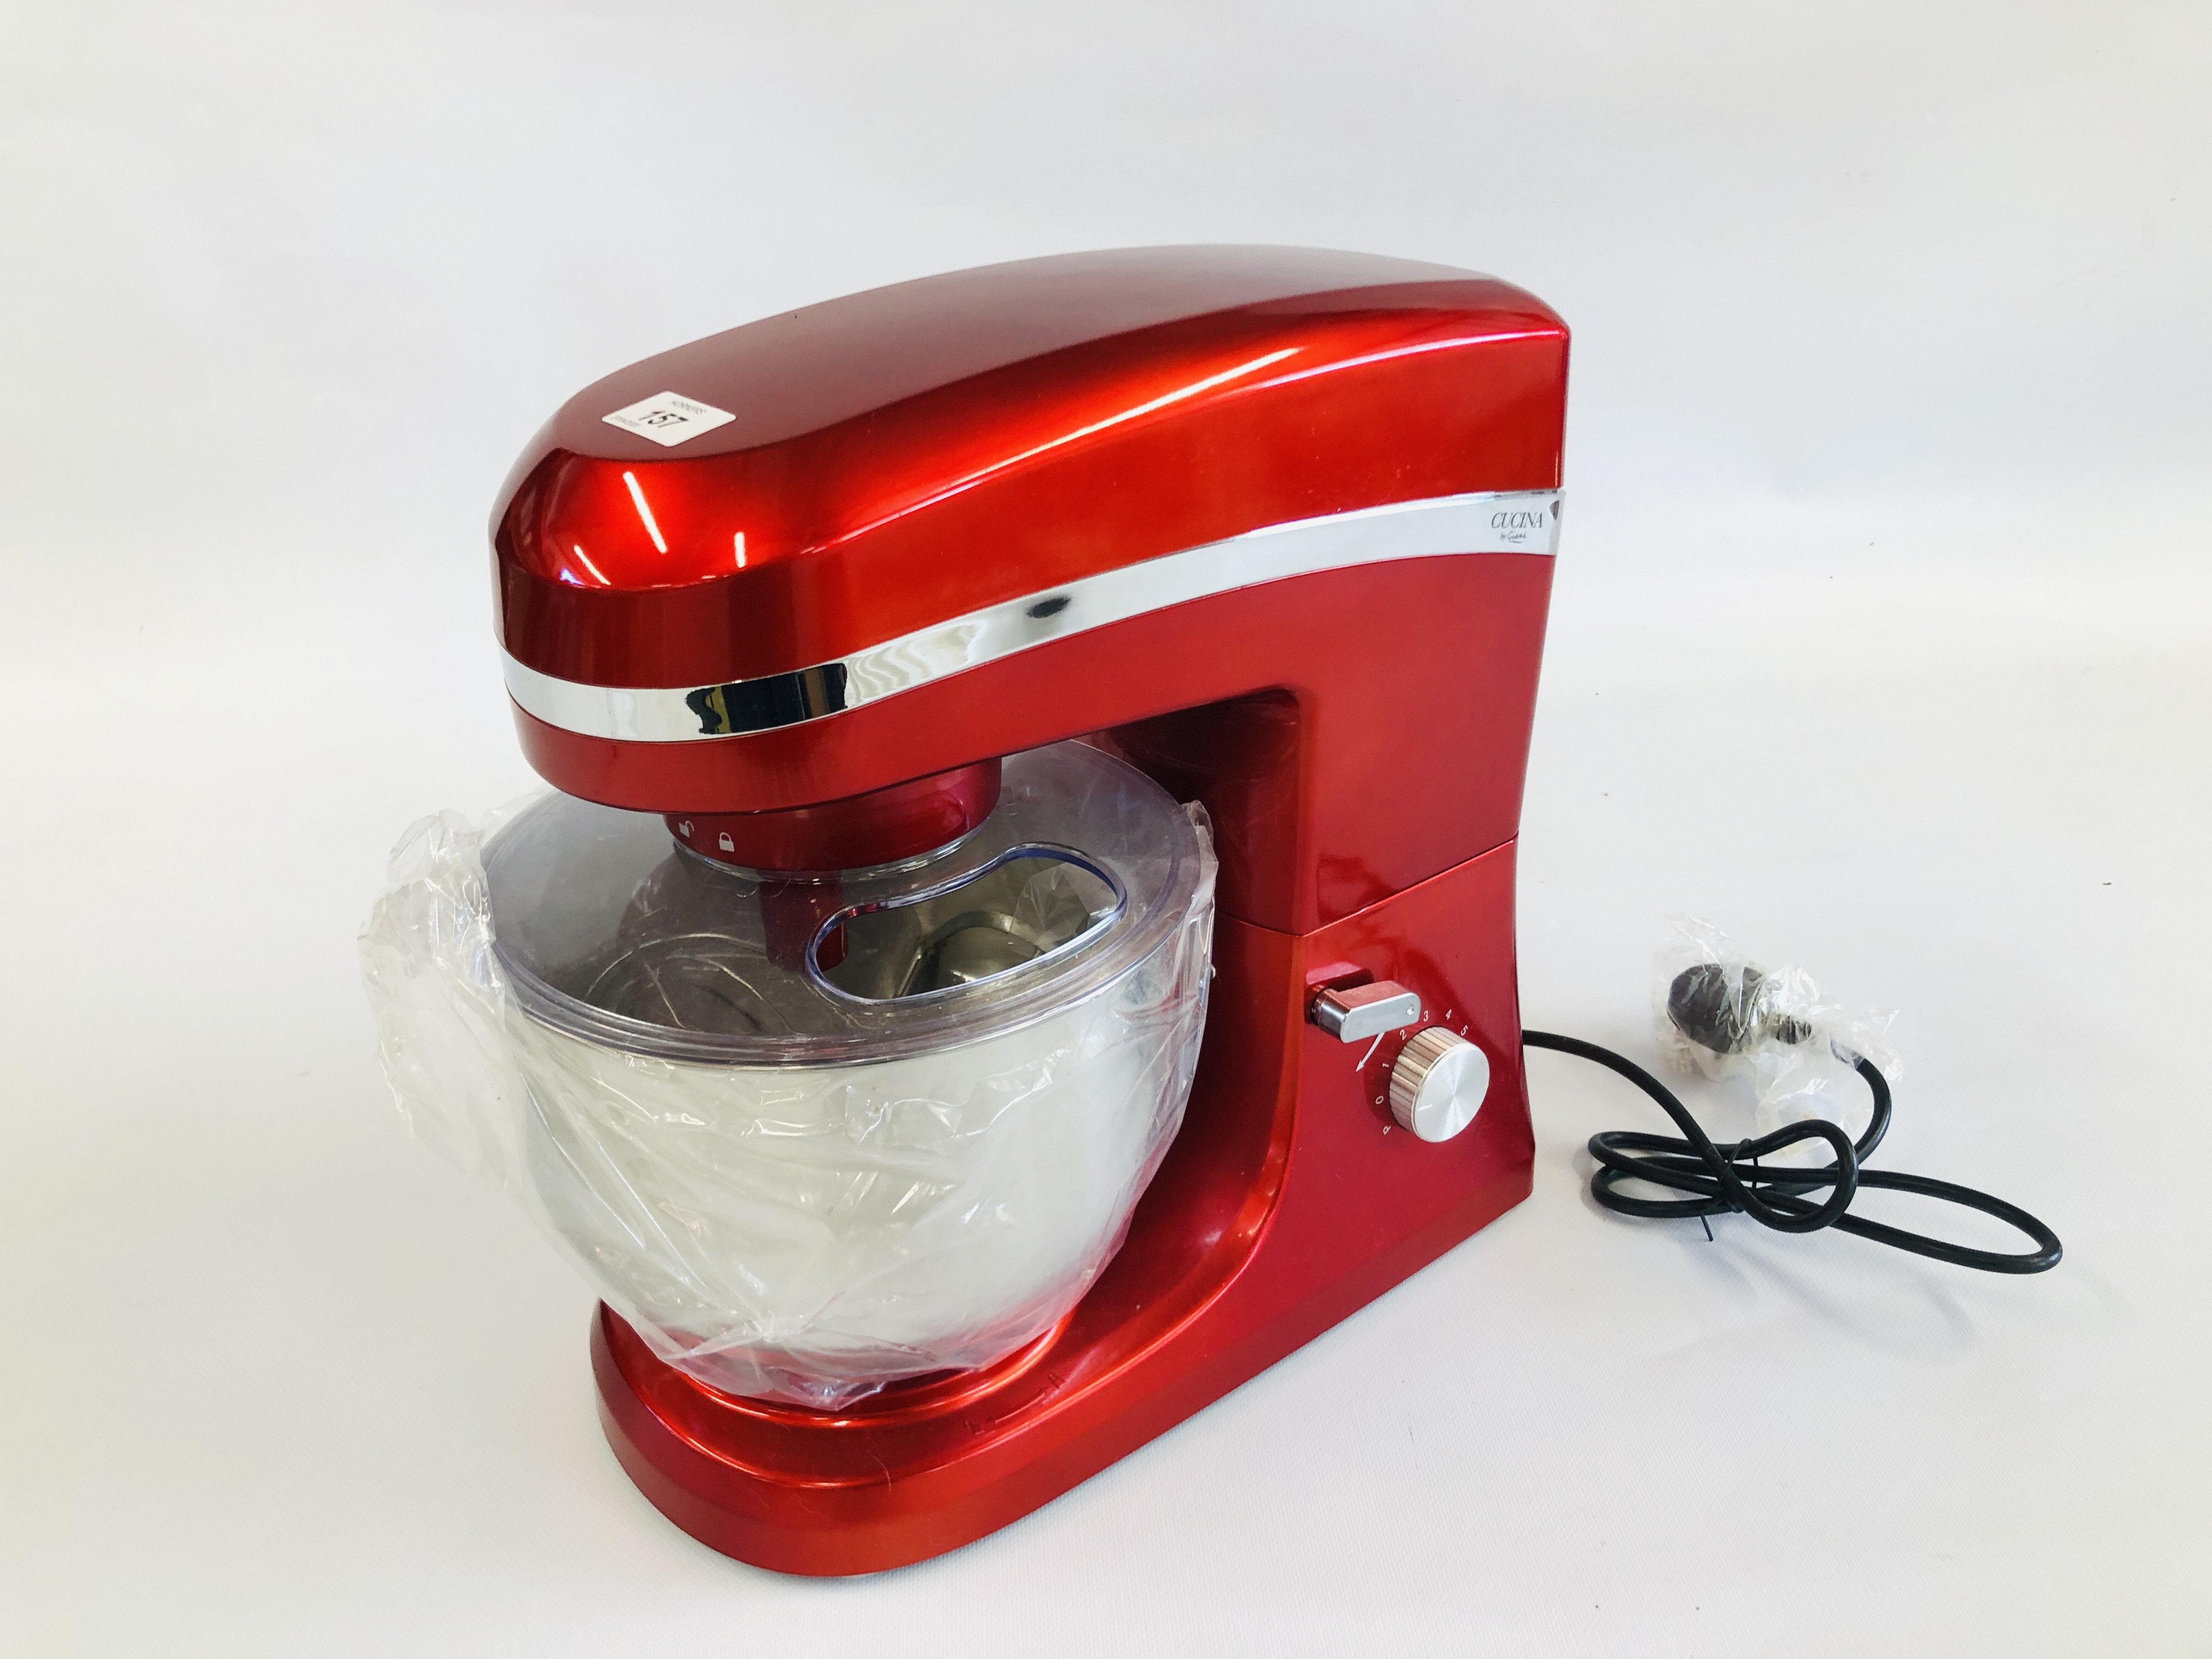 A "CUCINA" BY GIANI ELECTRIC FOOD STAND MIXER, RED FINISH (NEW UNBOXED) - SOLD AS SEEN.